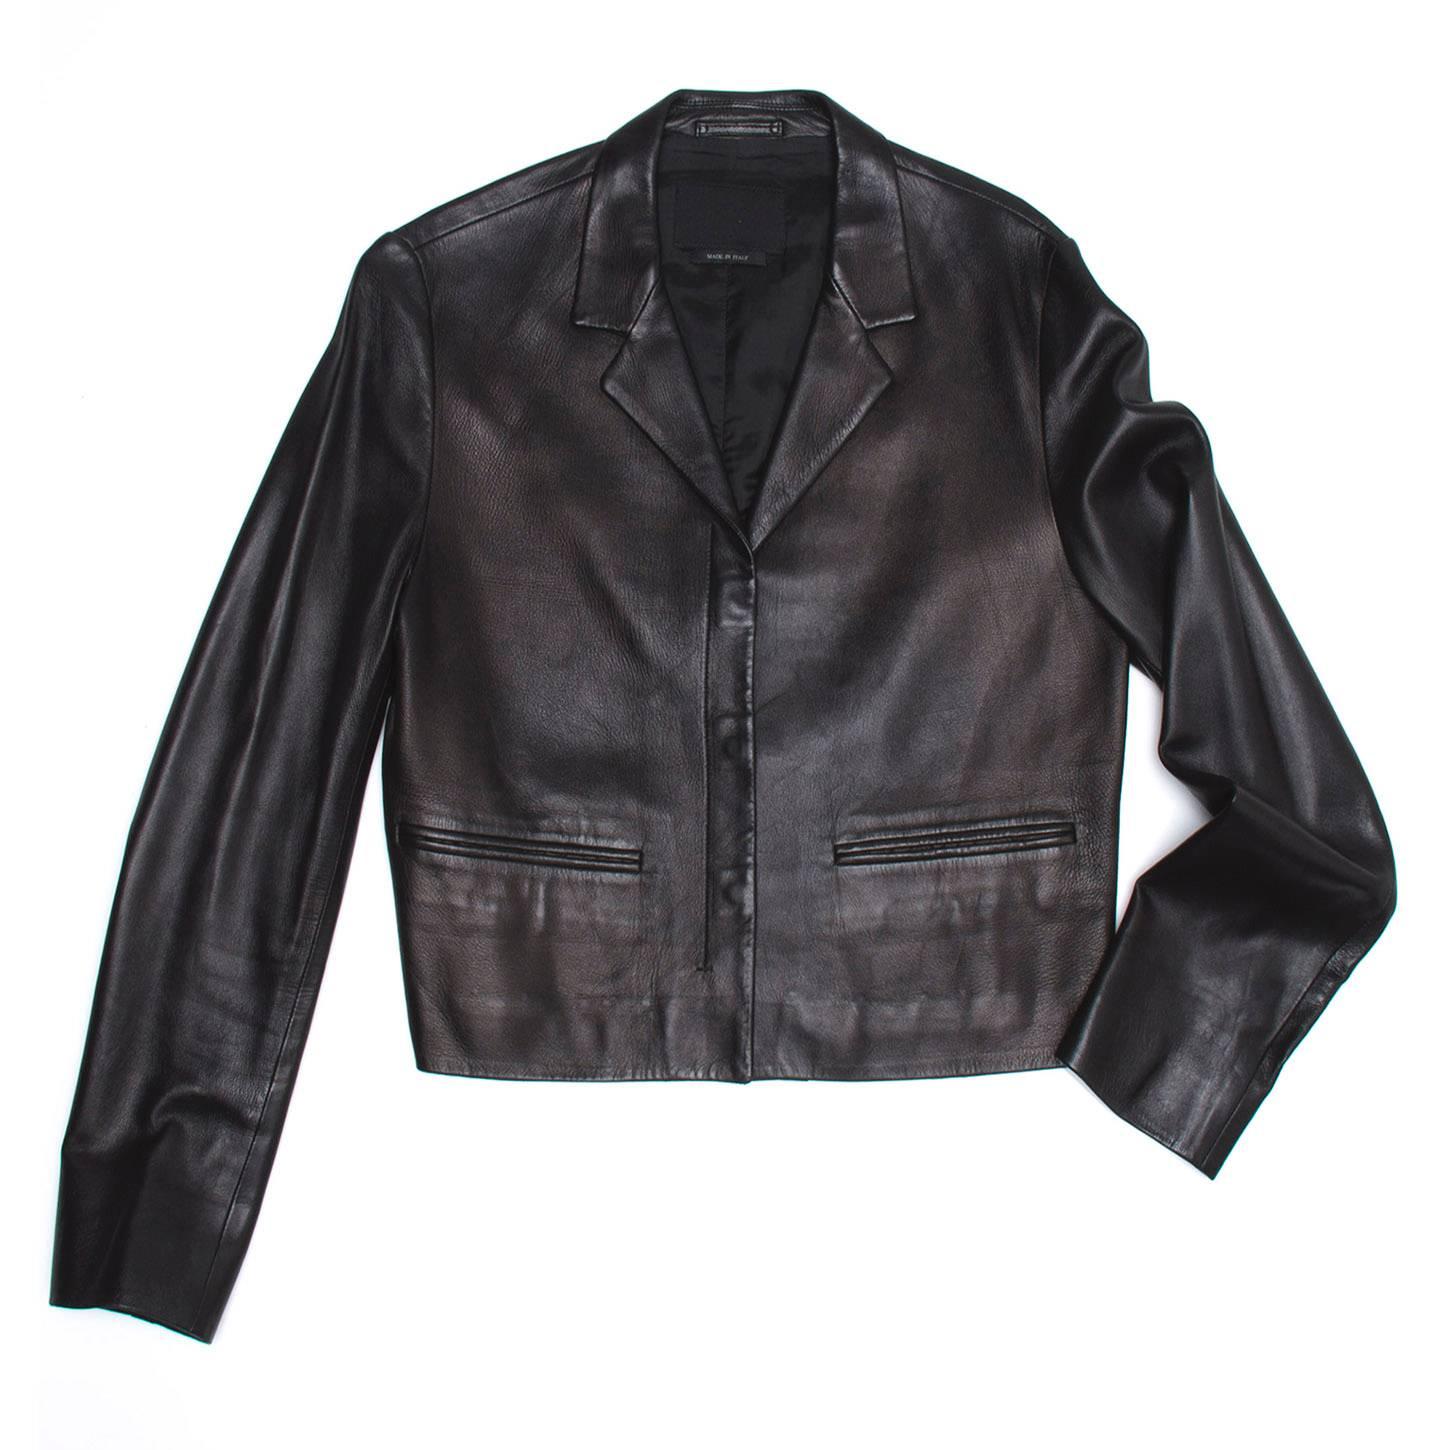 Black soft nappa leather cropped jacket with rounded snap button collar.

Size  42 Italian sizing

Condition  Good: worn with love and has some minor fading